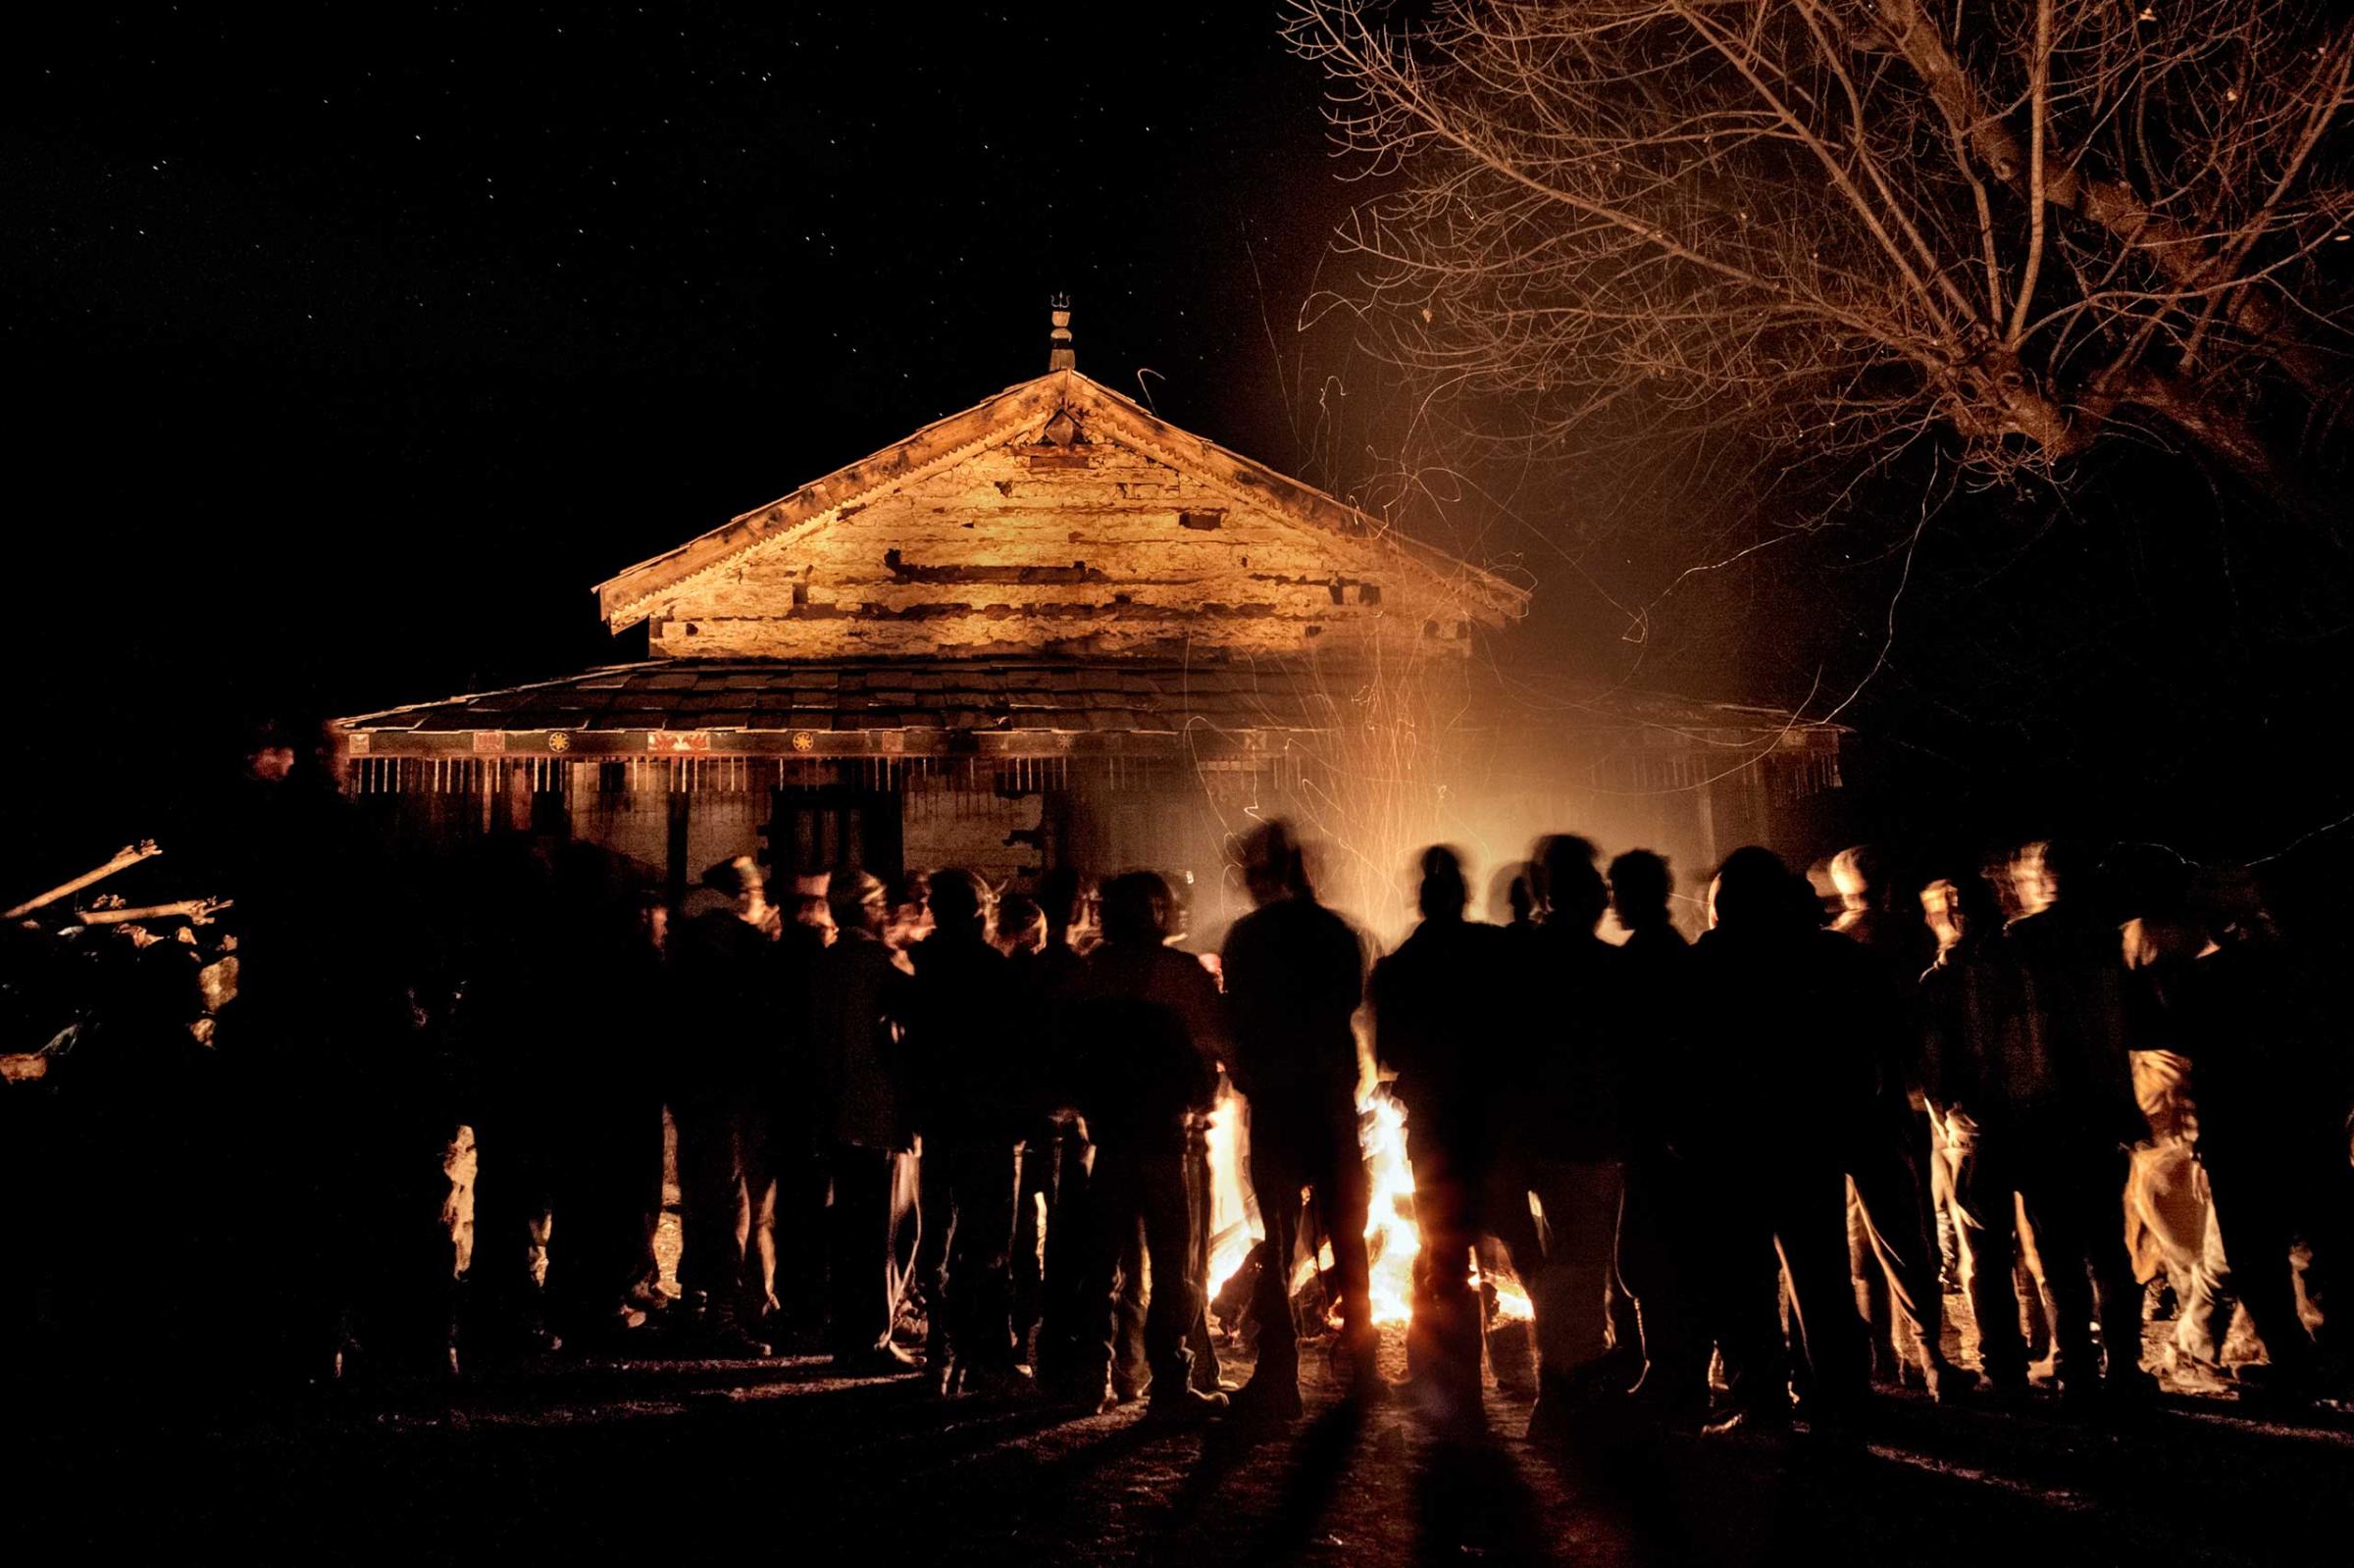 Villagers gather around a big fire set in front of the temple in occasion of the mela. Villagers are mainly Hindu, although they hail as well minor deities worshipped in the mountains, locally known as devta